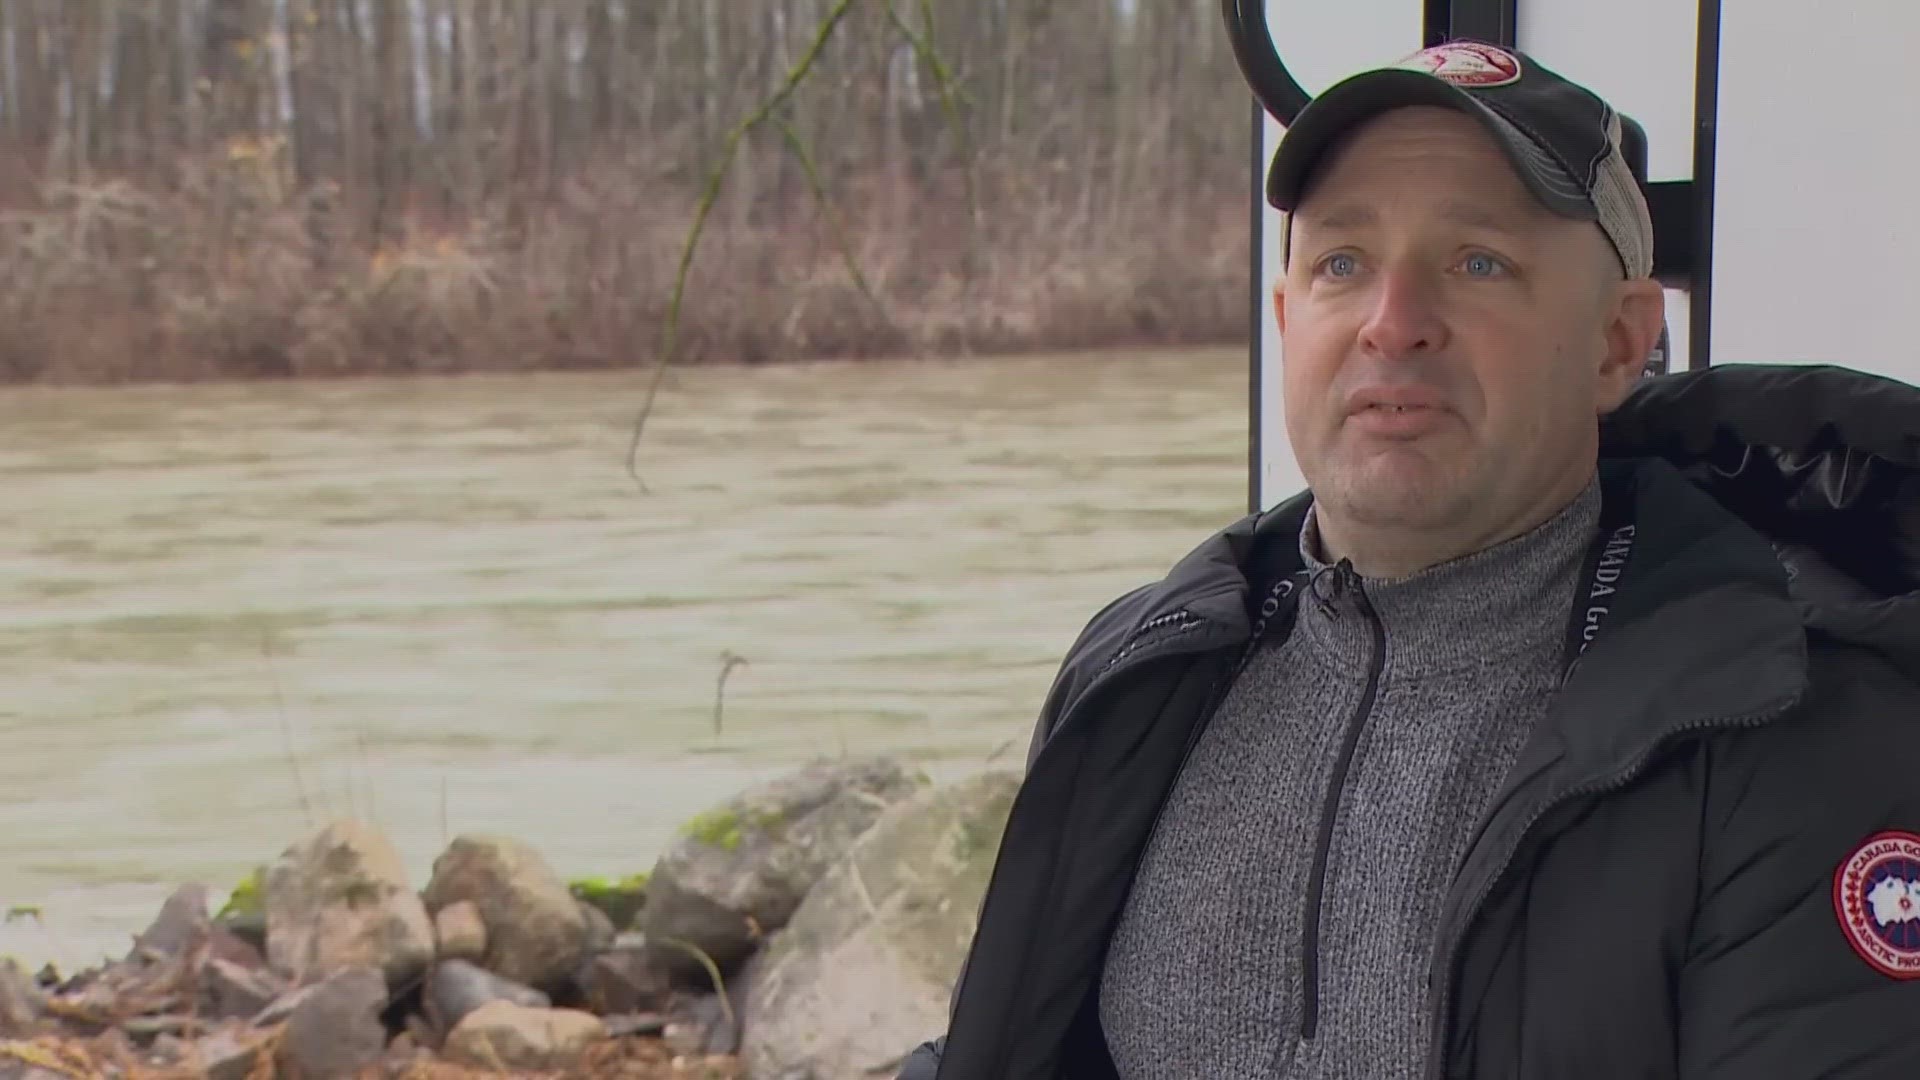 Chris Robl, a father of two, is still processing his near-death experience.